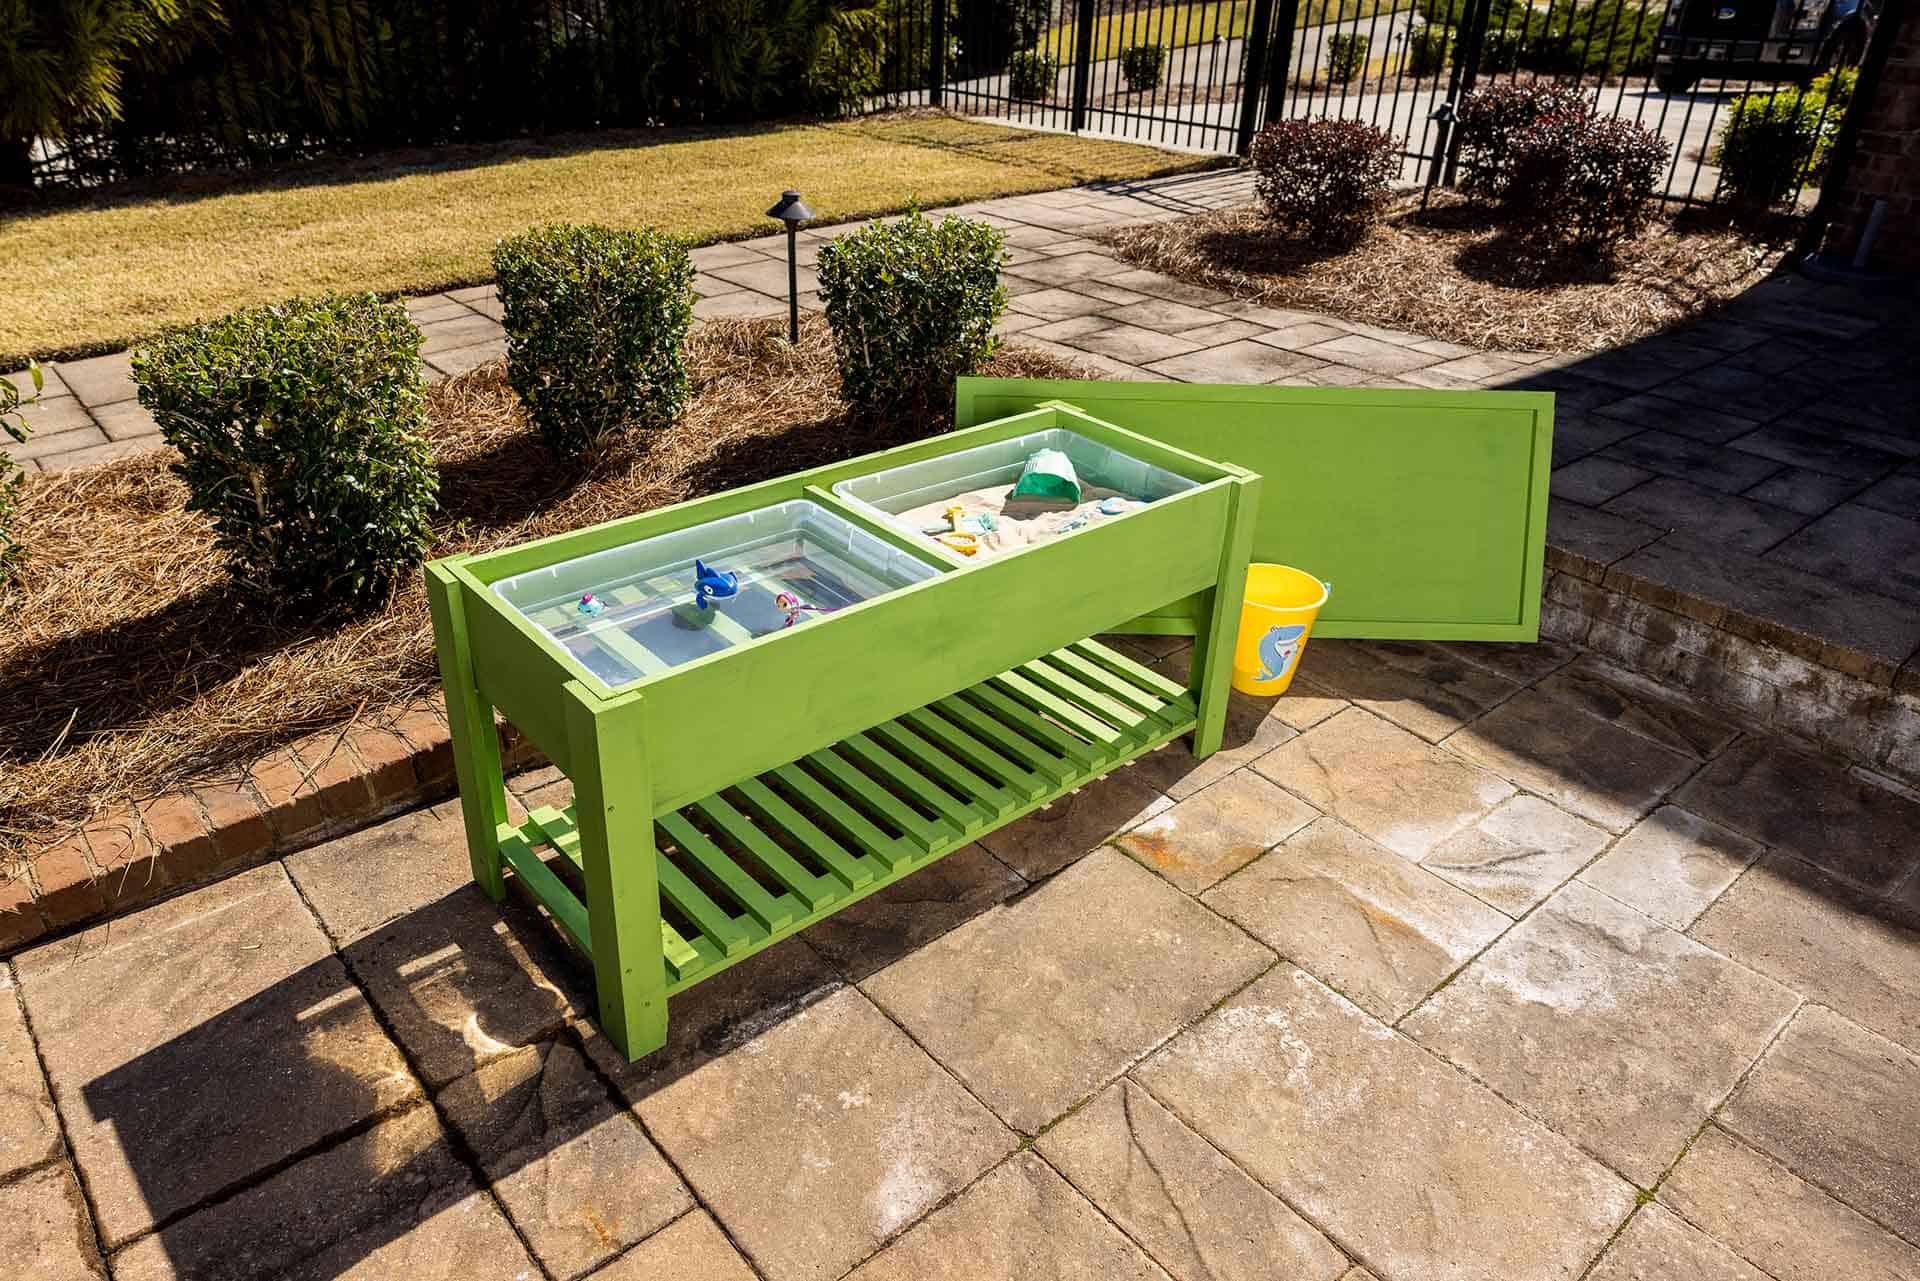 Green sandbox table with toys inside